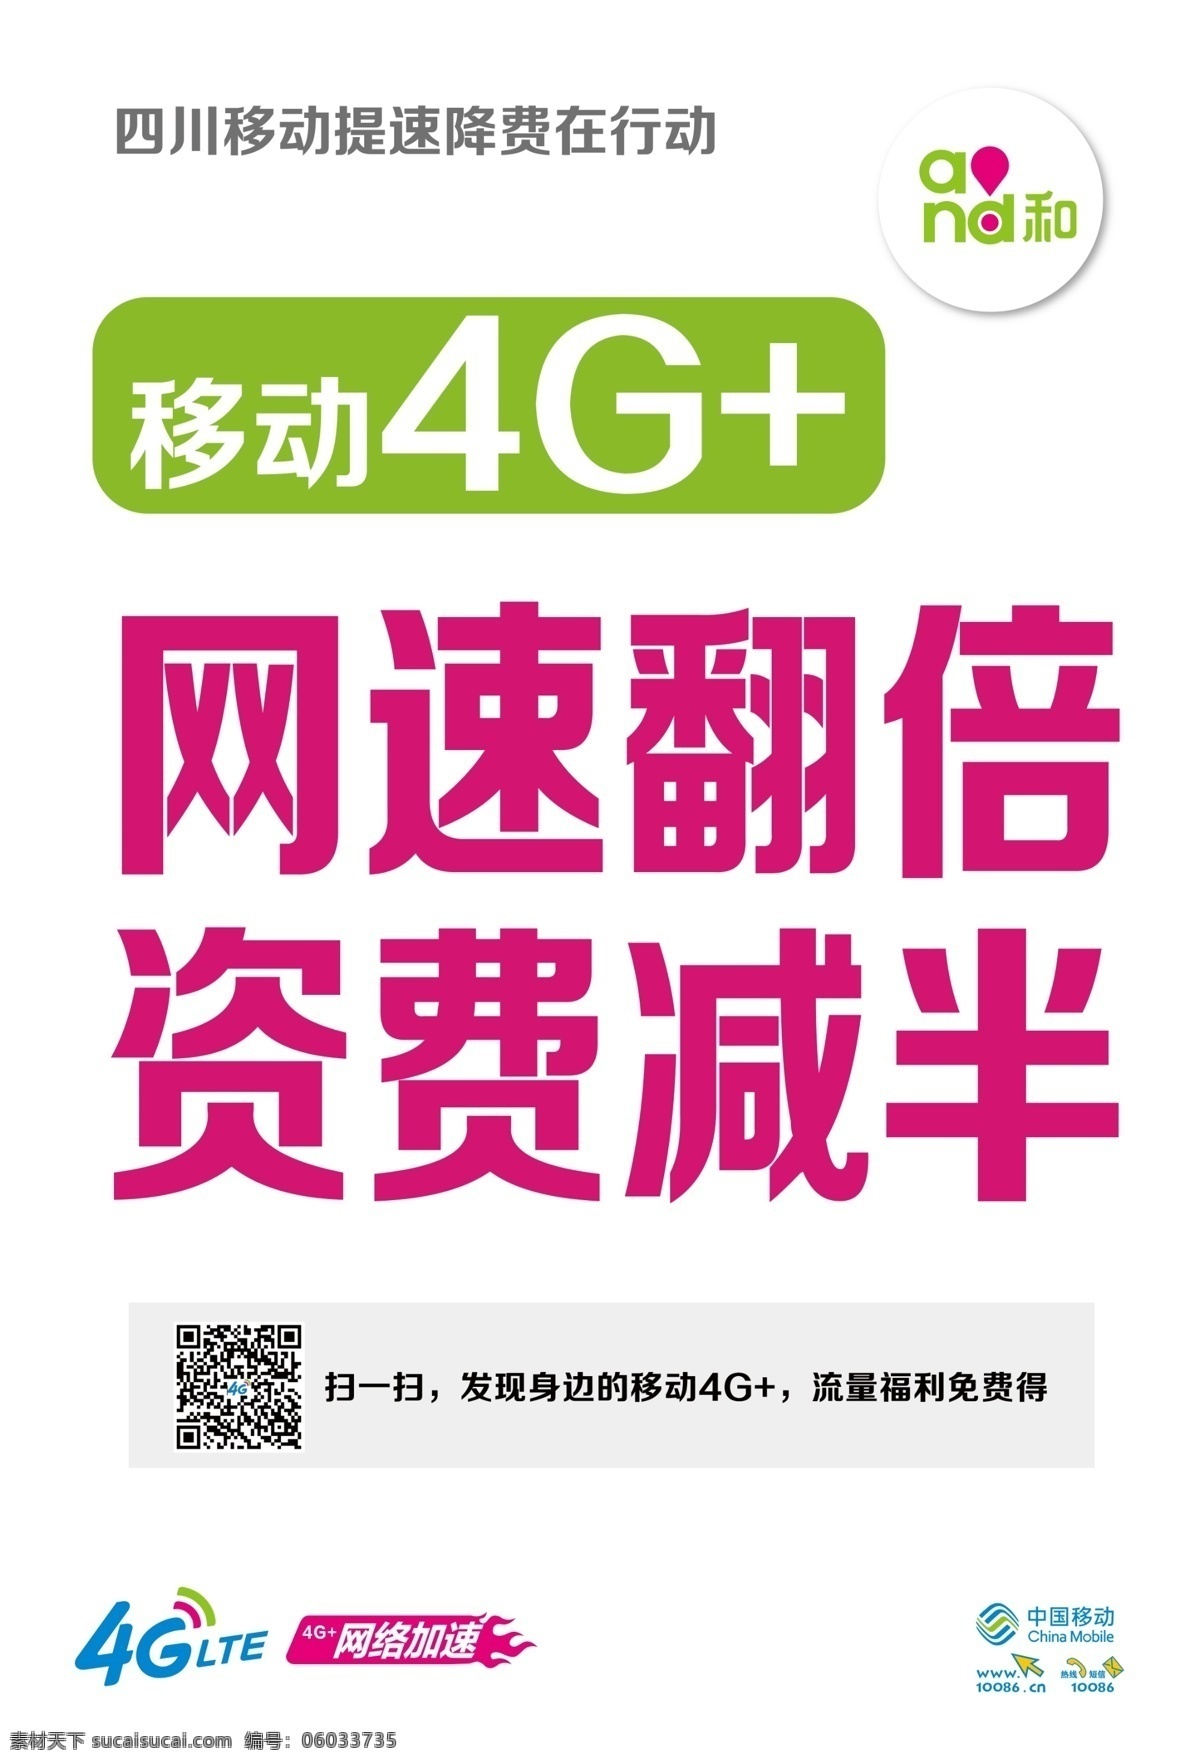 4g海报 4g 移动 资费 and